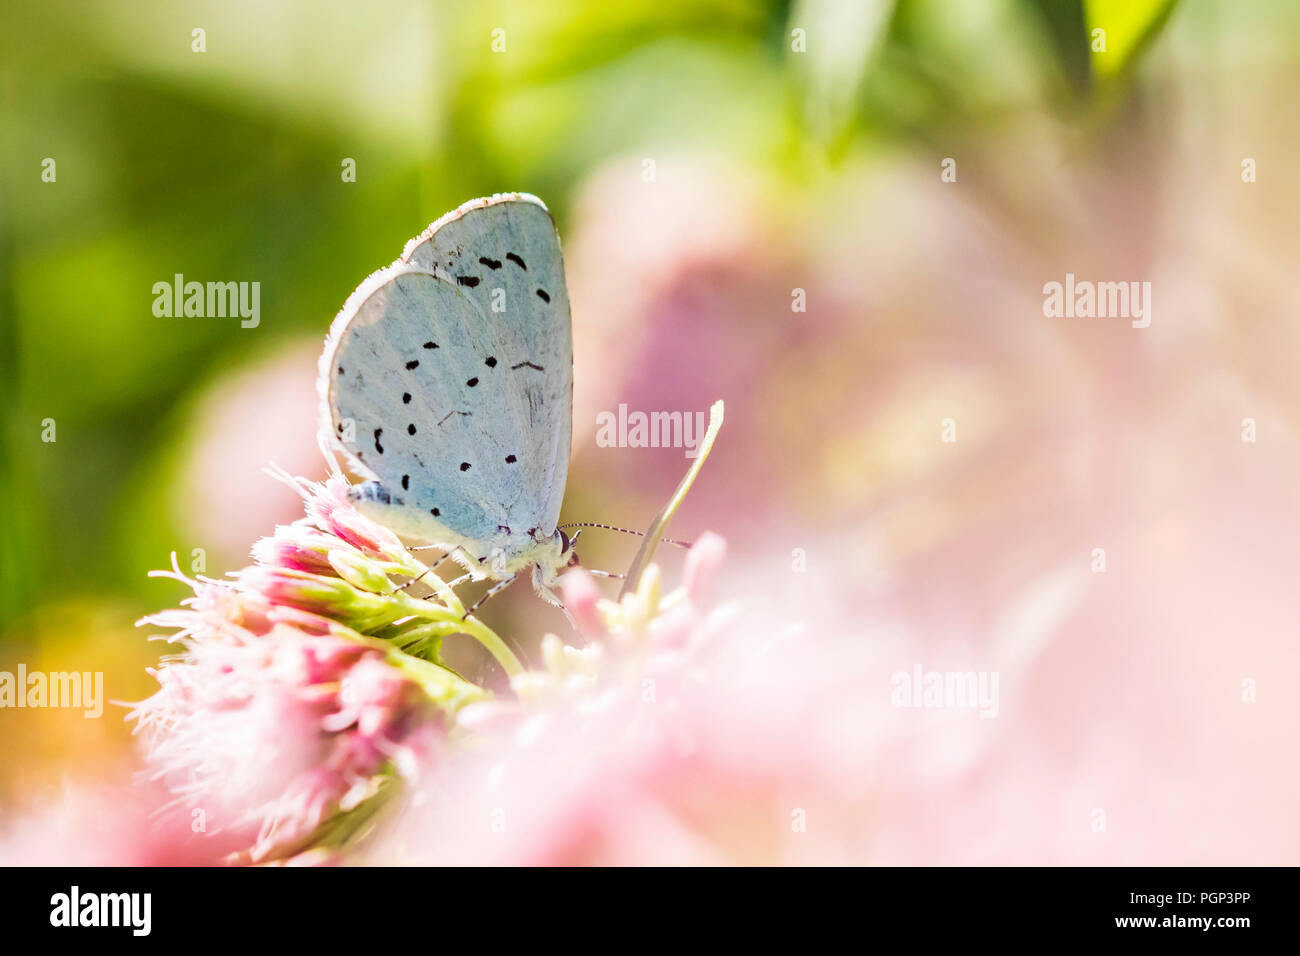 A holly blue (Celastrina argiolus) butterfly pollinating. The holly blue has pale silver-blue wings spotted with pale ivory dots. Stock Photo